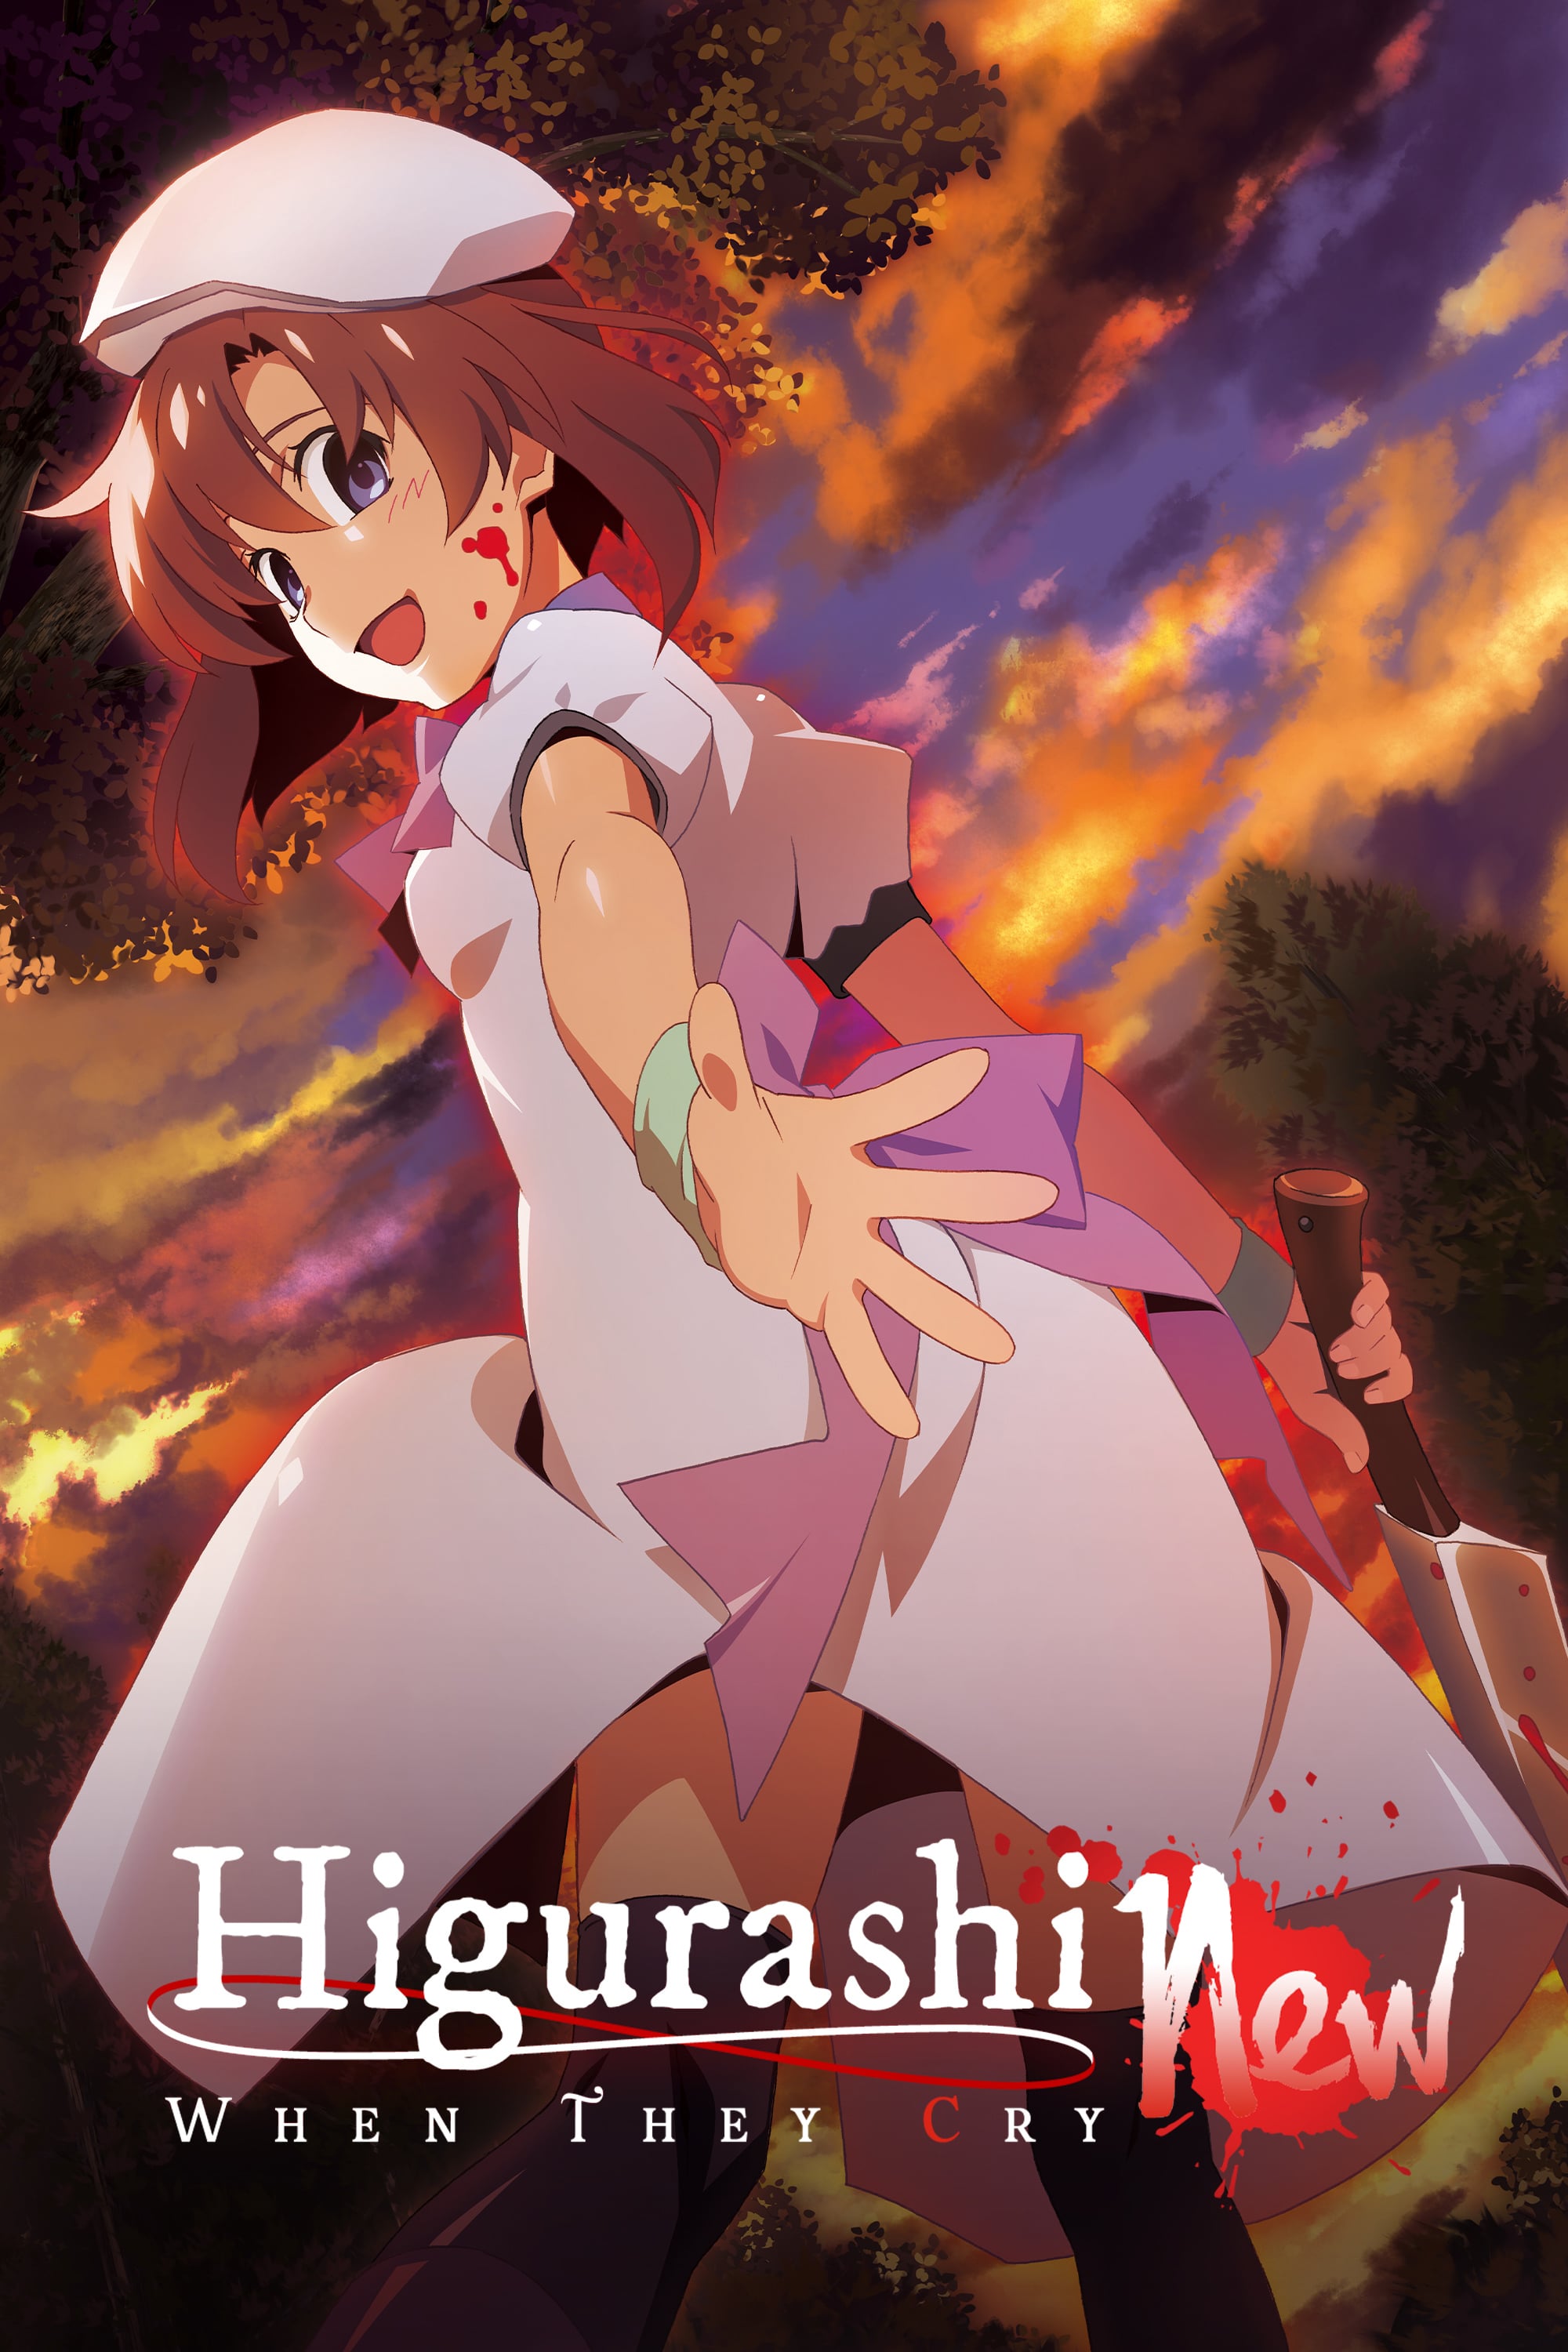 Higurashi: When They Cry - New Picture